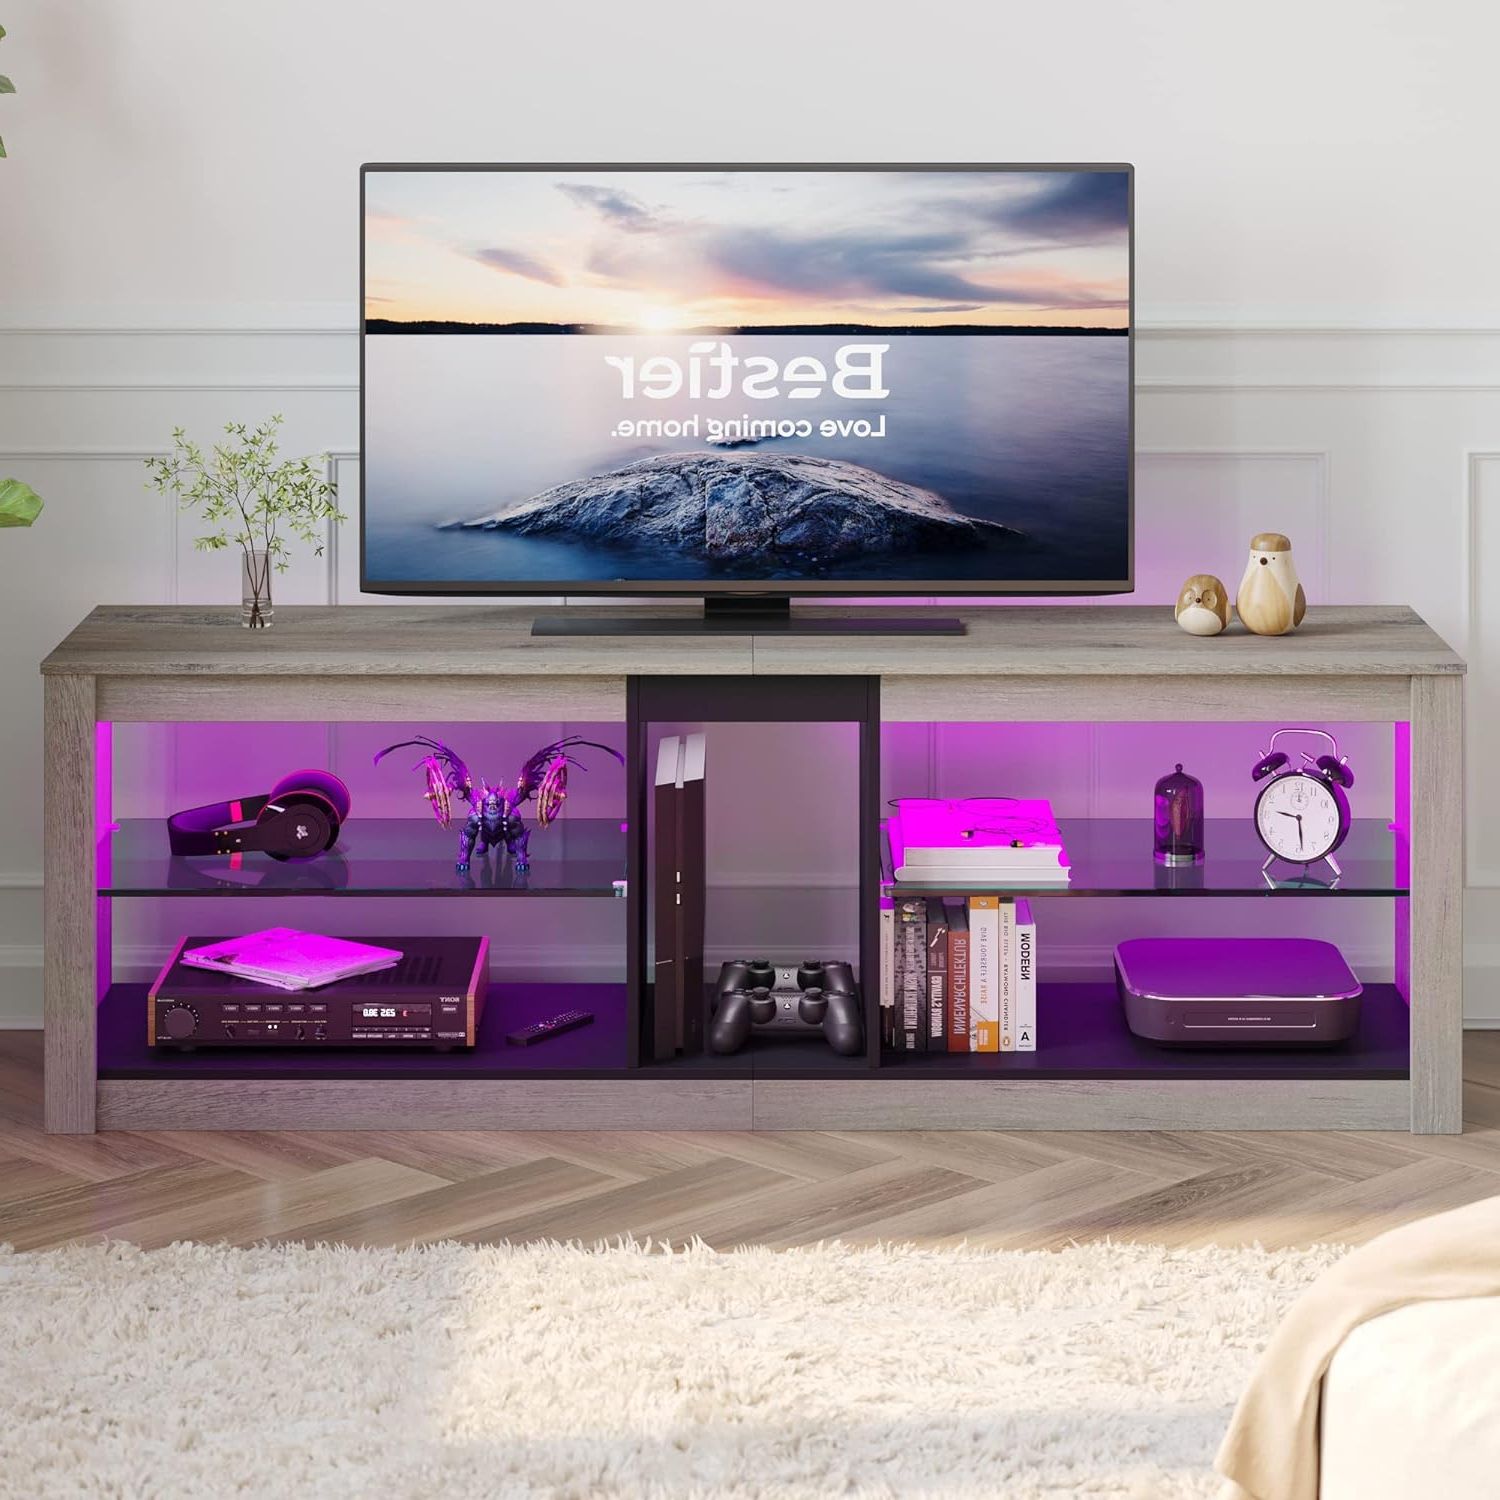 Bestier Rgb Tv Stand For 65 Gaming Entertainment India | Ubuy Inside Rgb Tv Entertainment Centers (Gallery 20 of 20)